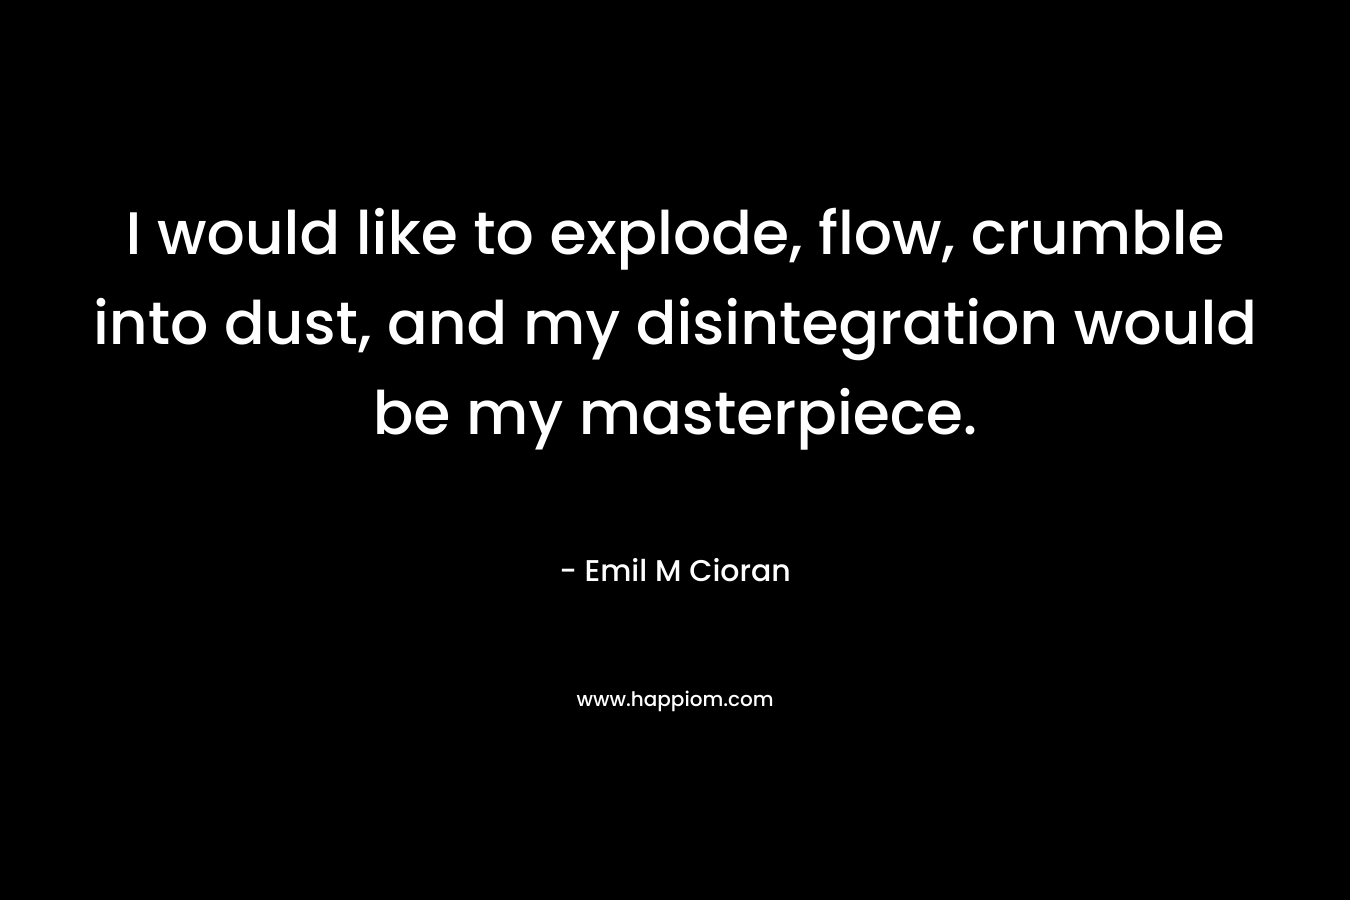 I would like to explode, flow, crumble into dust, and my disintegration would be my masterpiece.